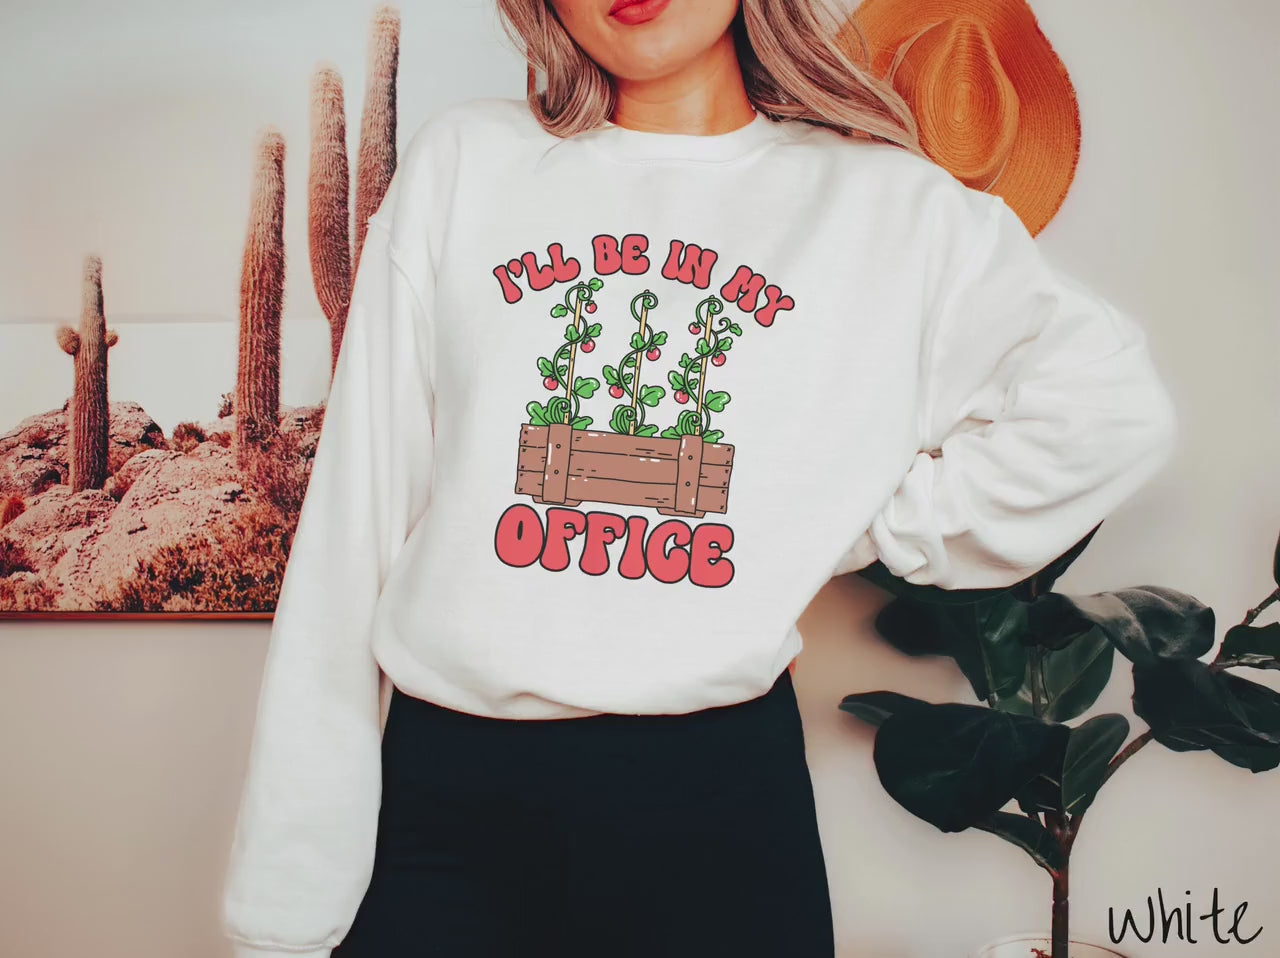 The I'll Be in My Office Tomato Garden Sweatshirt, Gift This Spring-Garden Sweater to your Friends!